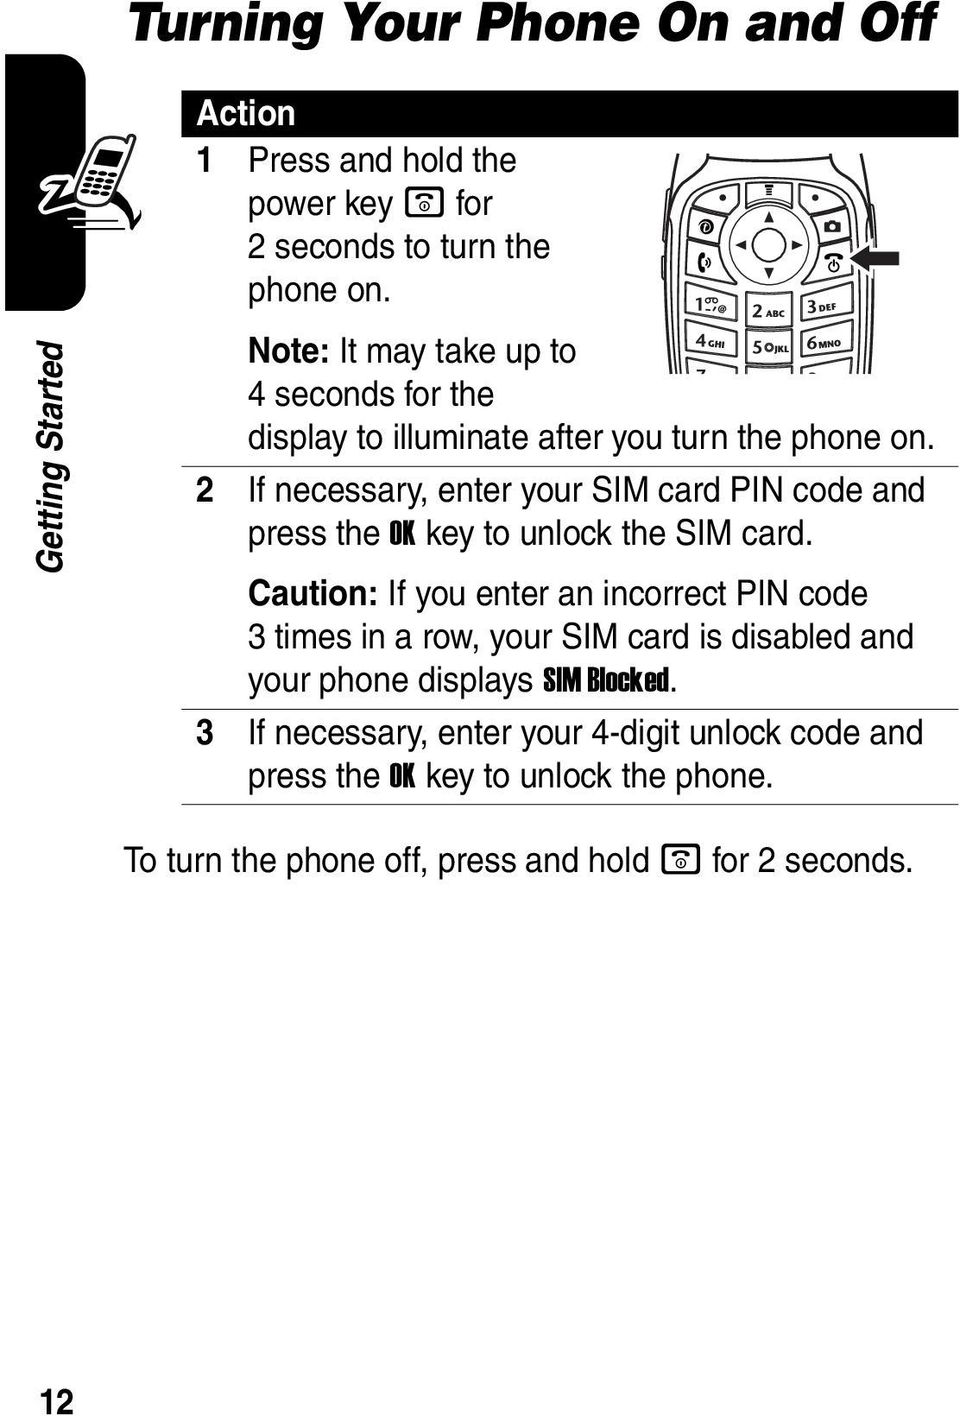 2 If necessary, enter your SIM card PIN code and press the OK key to unlock the SIM card.